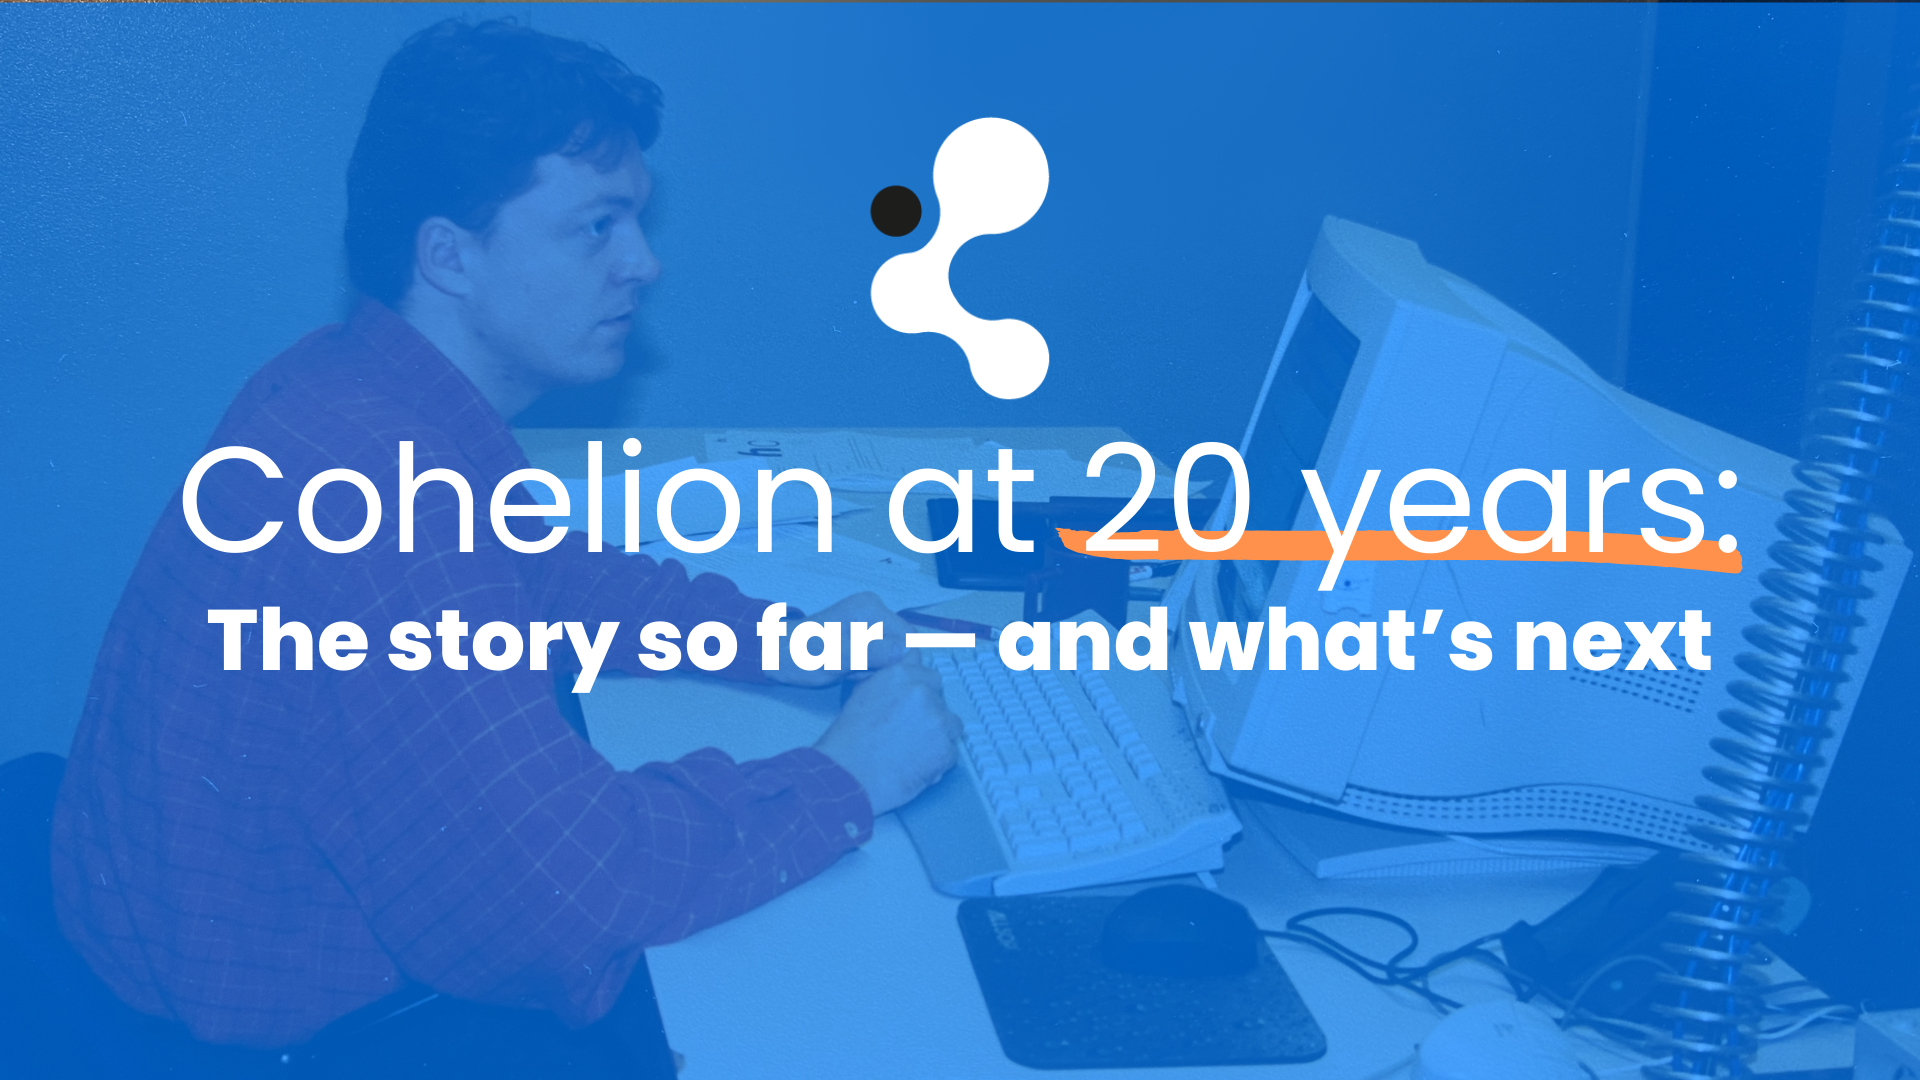 Cohelion at 20 years (3)